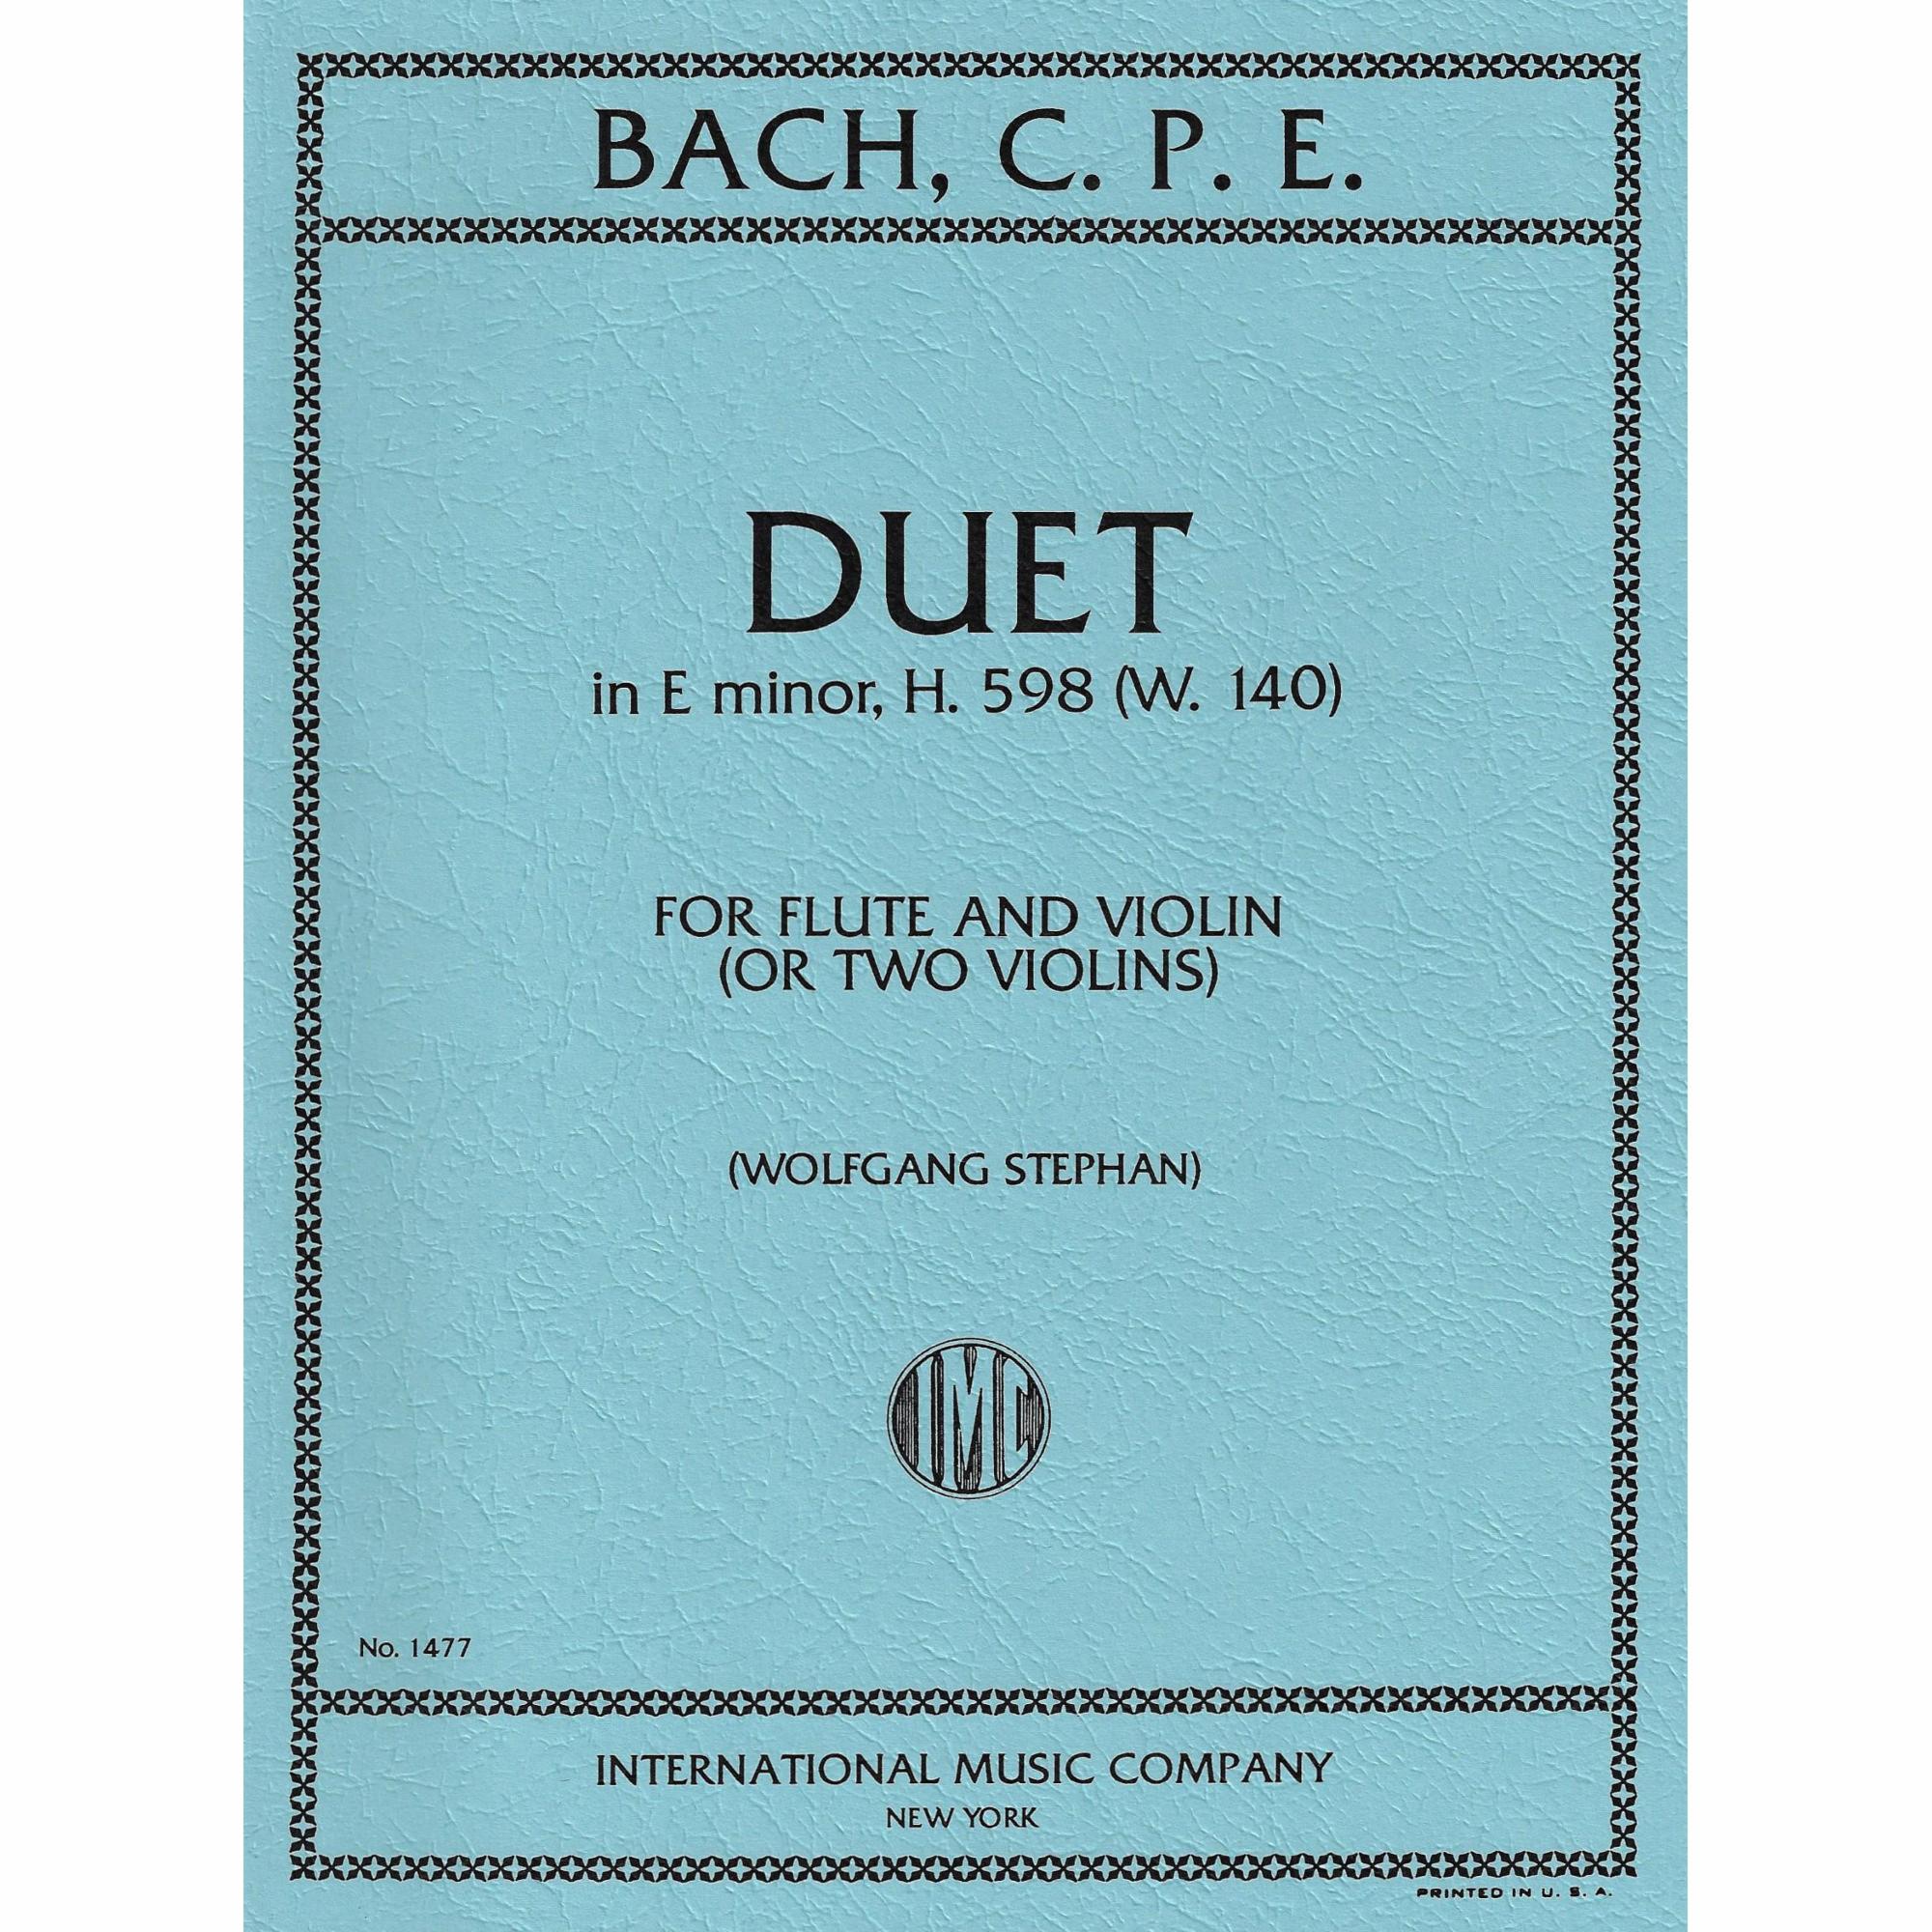 C. P. E. Bach -- Duet in E Minor, H. 598 for Two Violins